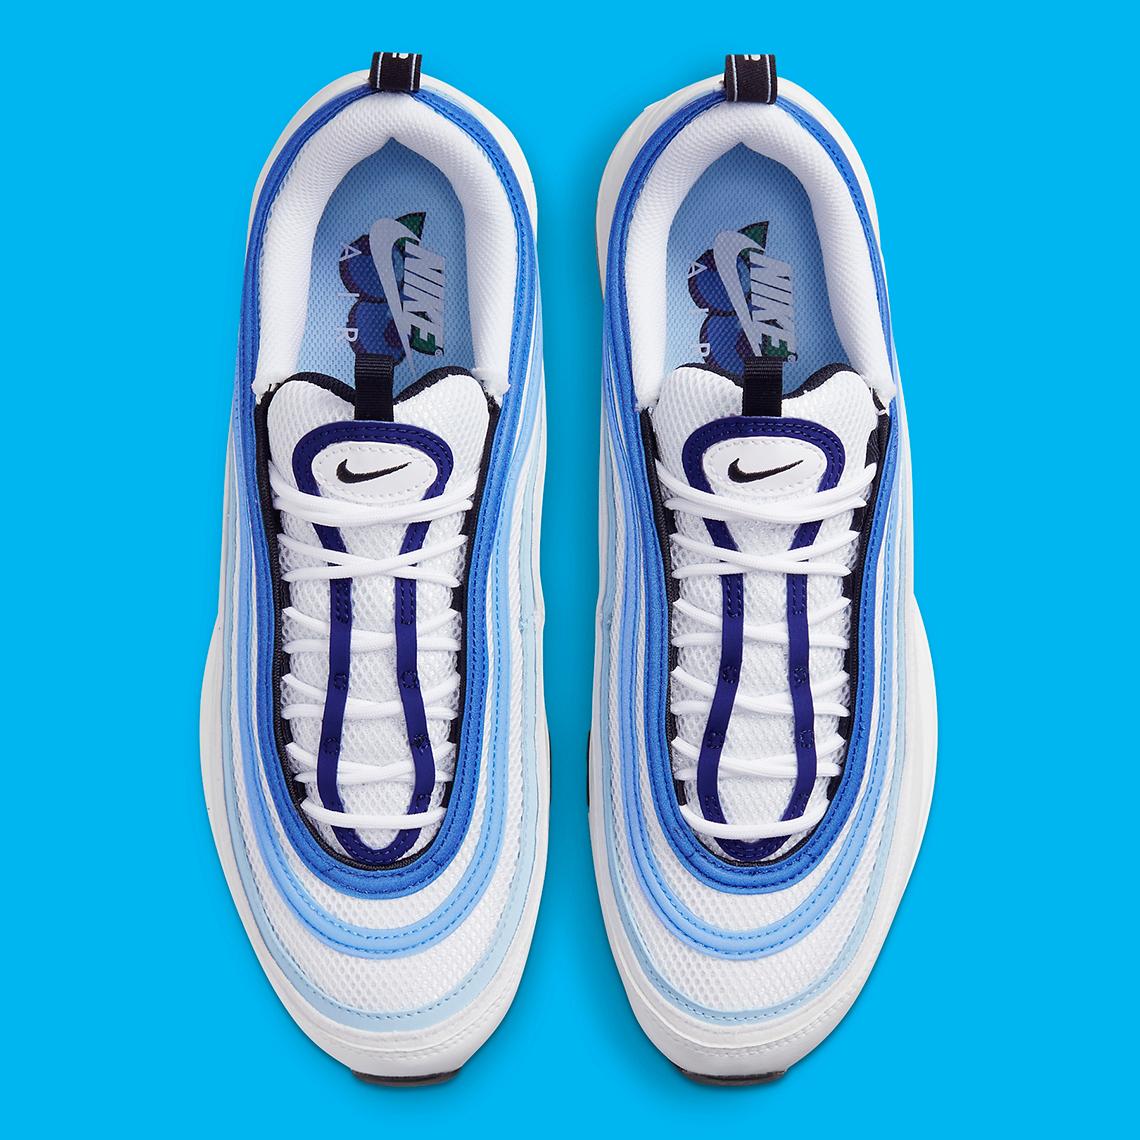 nike-air-max-97-blueberry-do8900-100-release-date-5.jpg